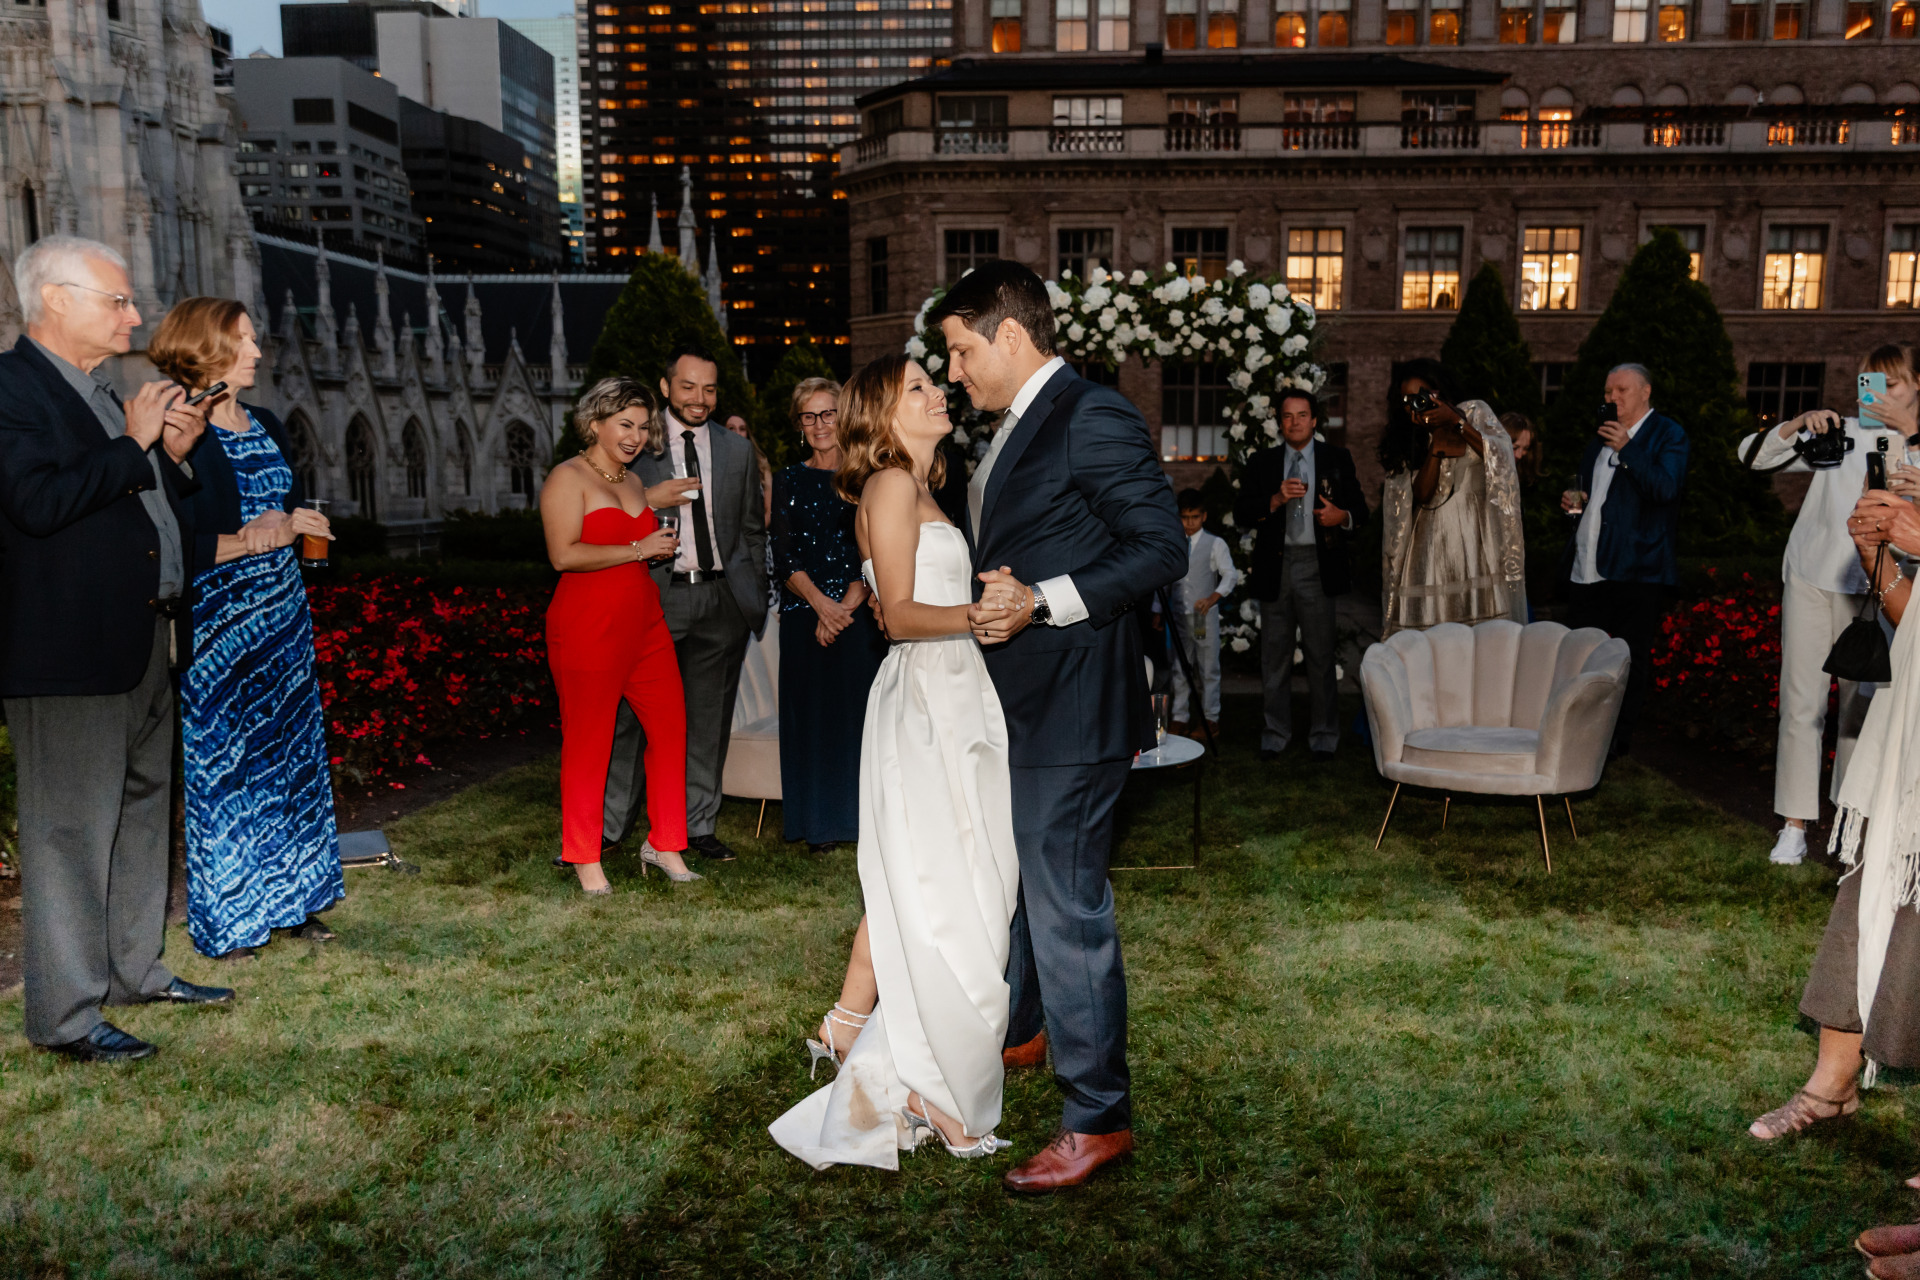 7 Wedding reception in NYC event photographer 4